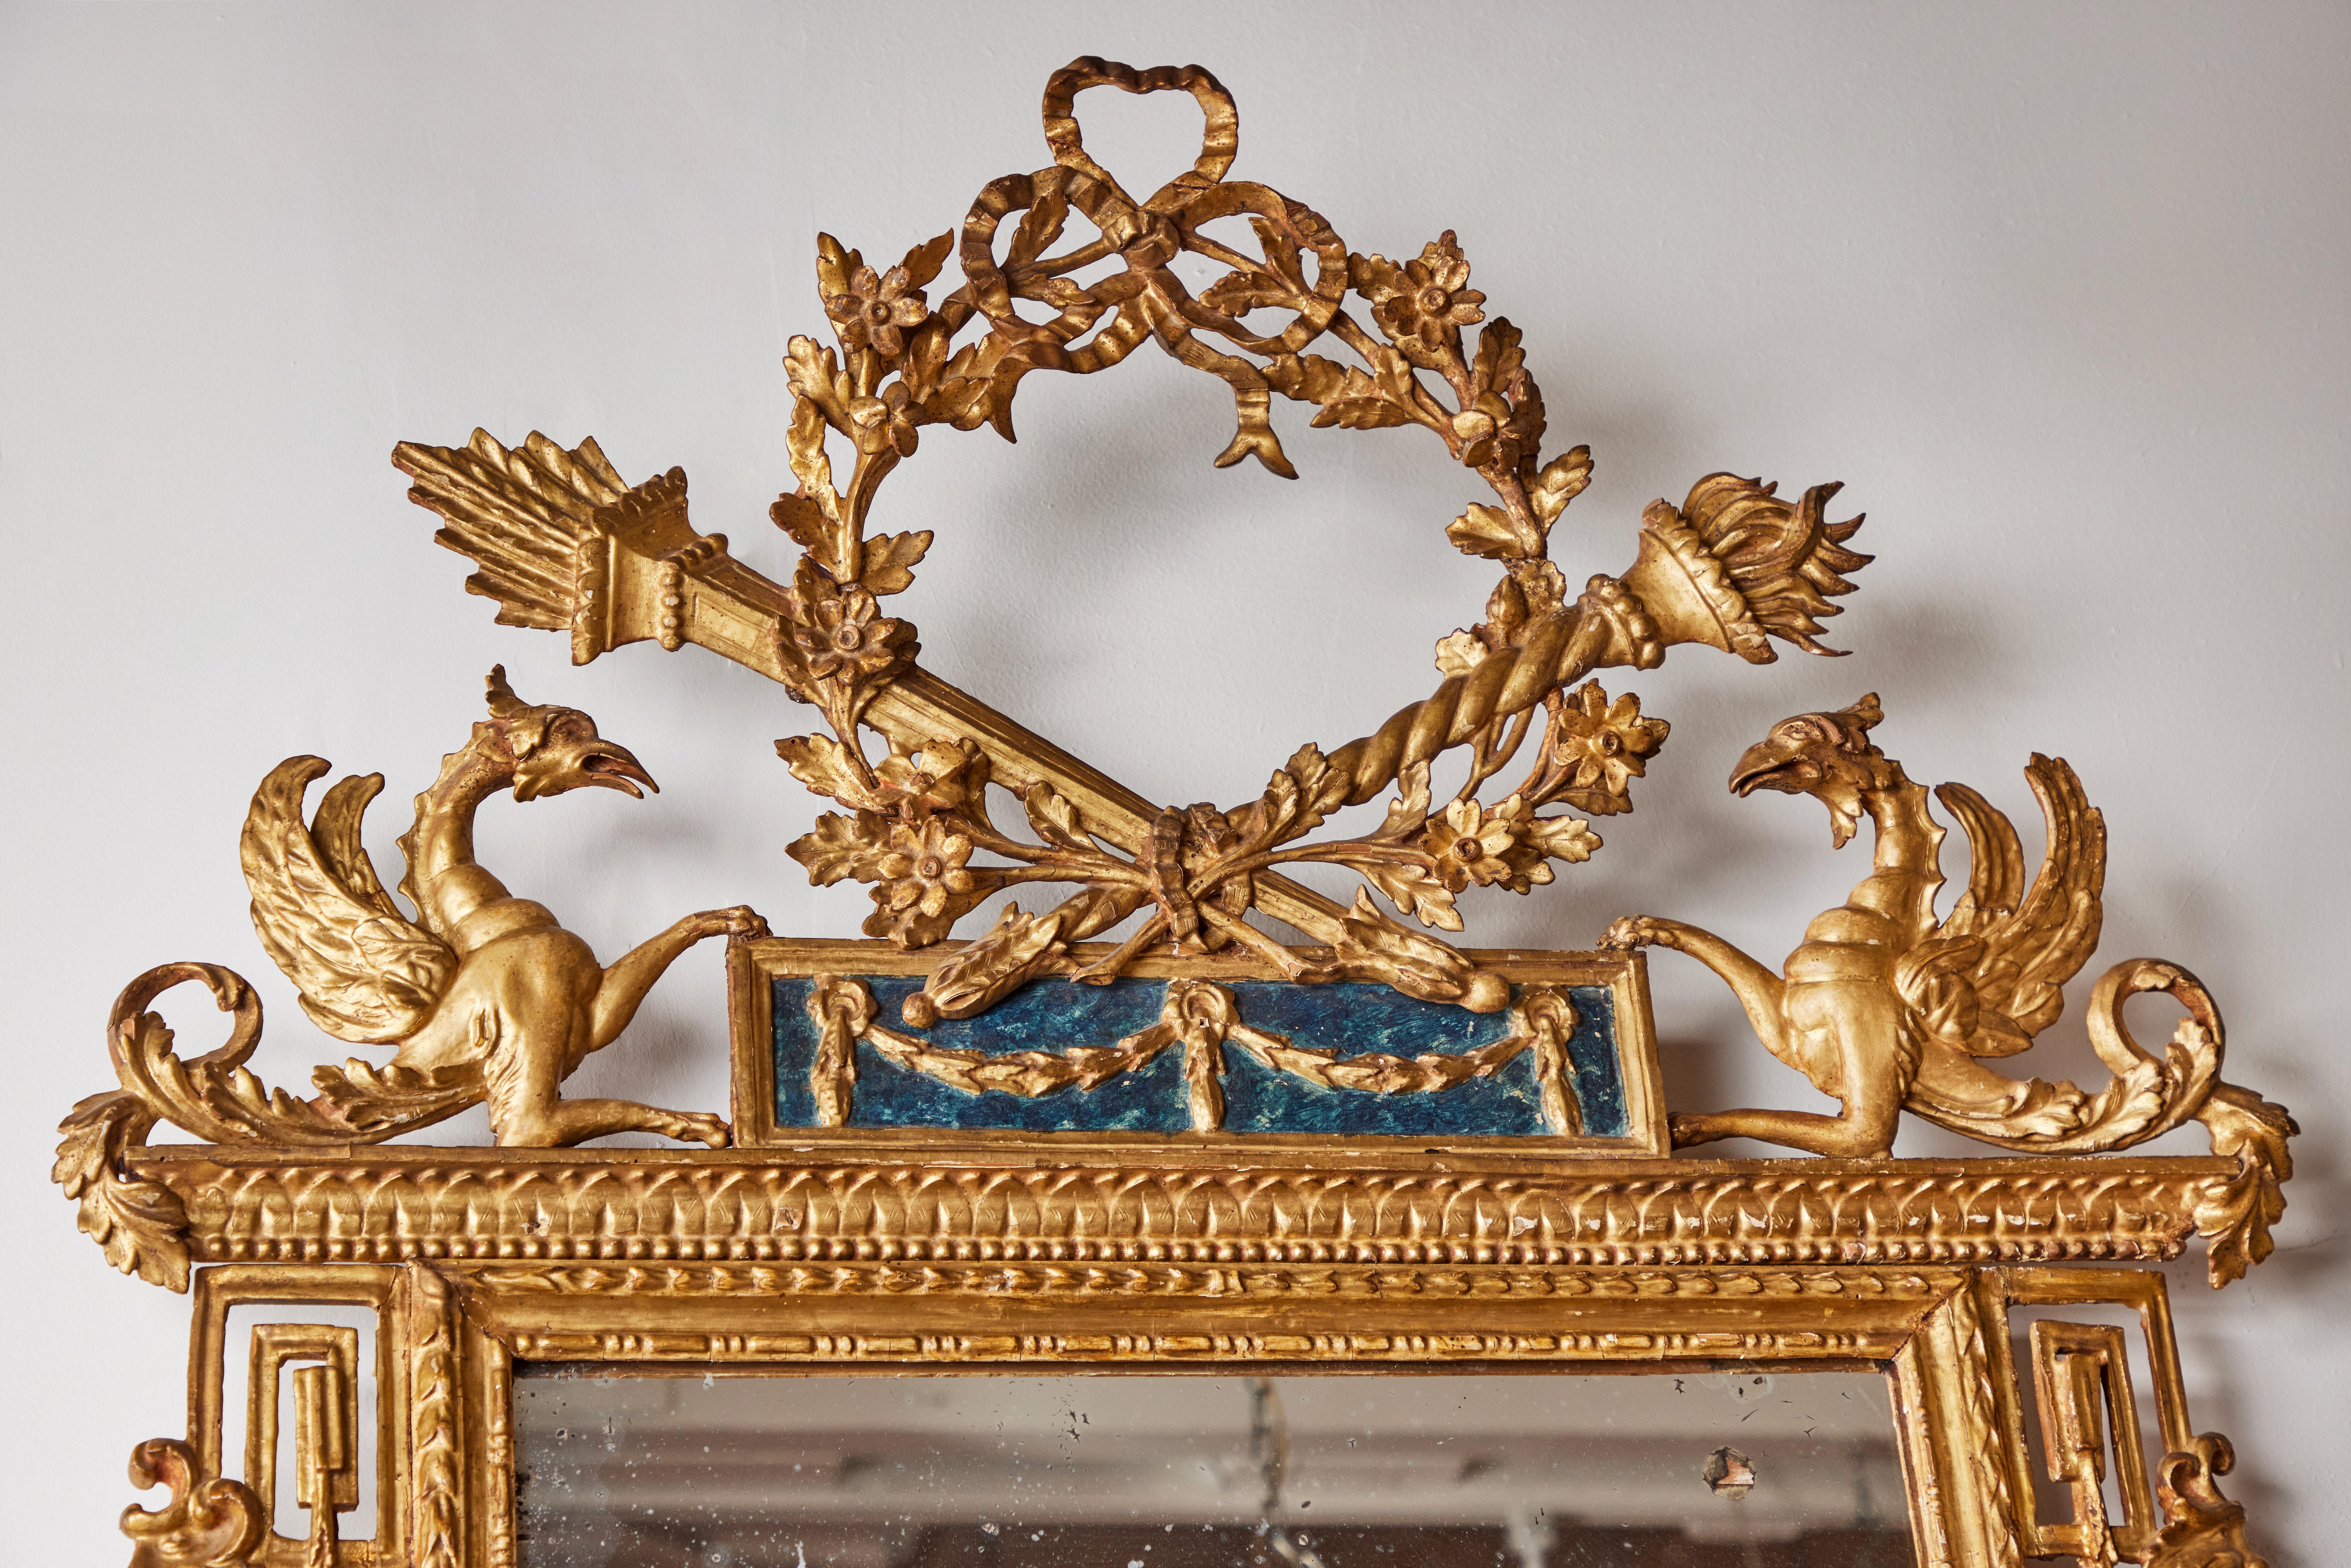 A pair of completely original, hand-carved and gilded, Italian, c. 1800 pier mirrors. Each featuring a spectacular crown consisting of a pierced, flower covered wreath surmounted by a bow, and flanked with lit torches. The wreath sits above a parcel